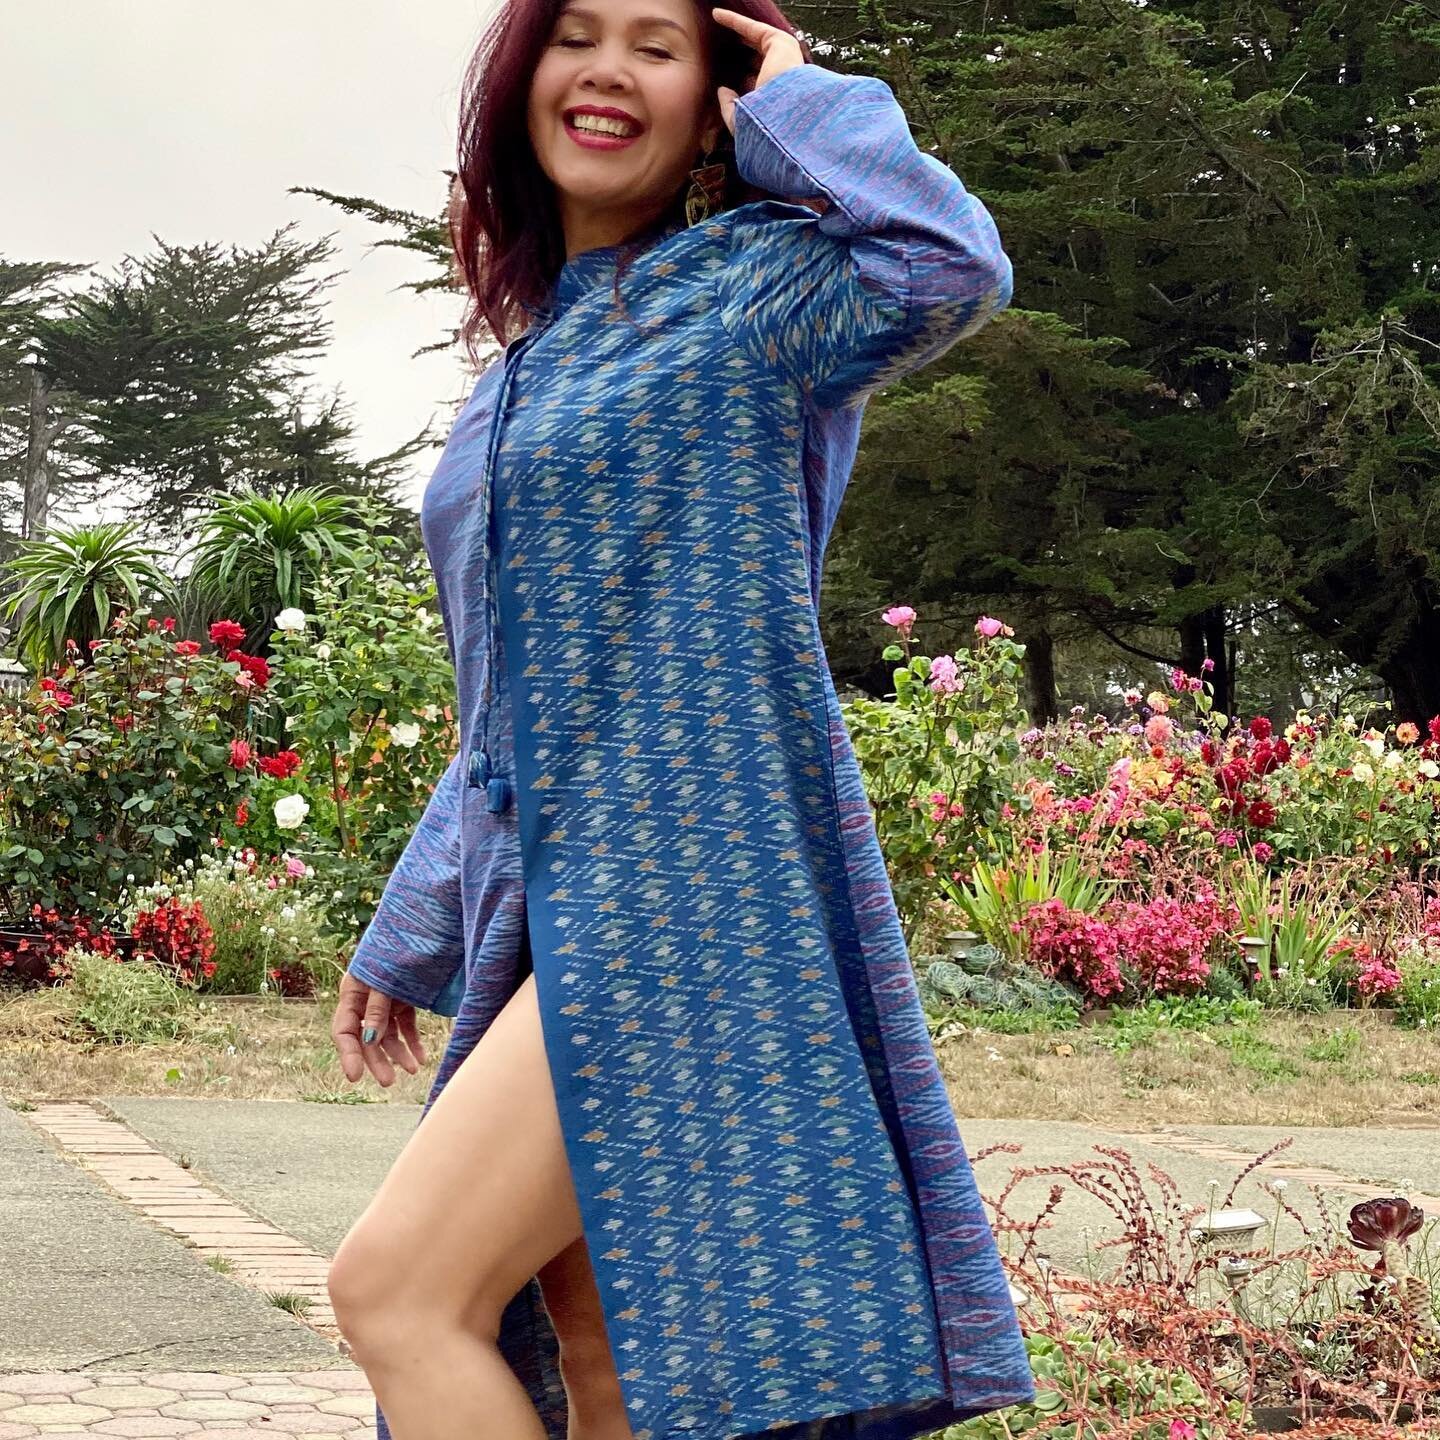 I always feel sexy even I wearing Vintage Silk Tunic #vintage #unique #sexy #comfort #myworld #relaxing #antique #silk #tunicstyle #thaisilk #tingsthaiculture #fortbragg #california